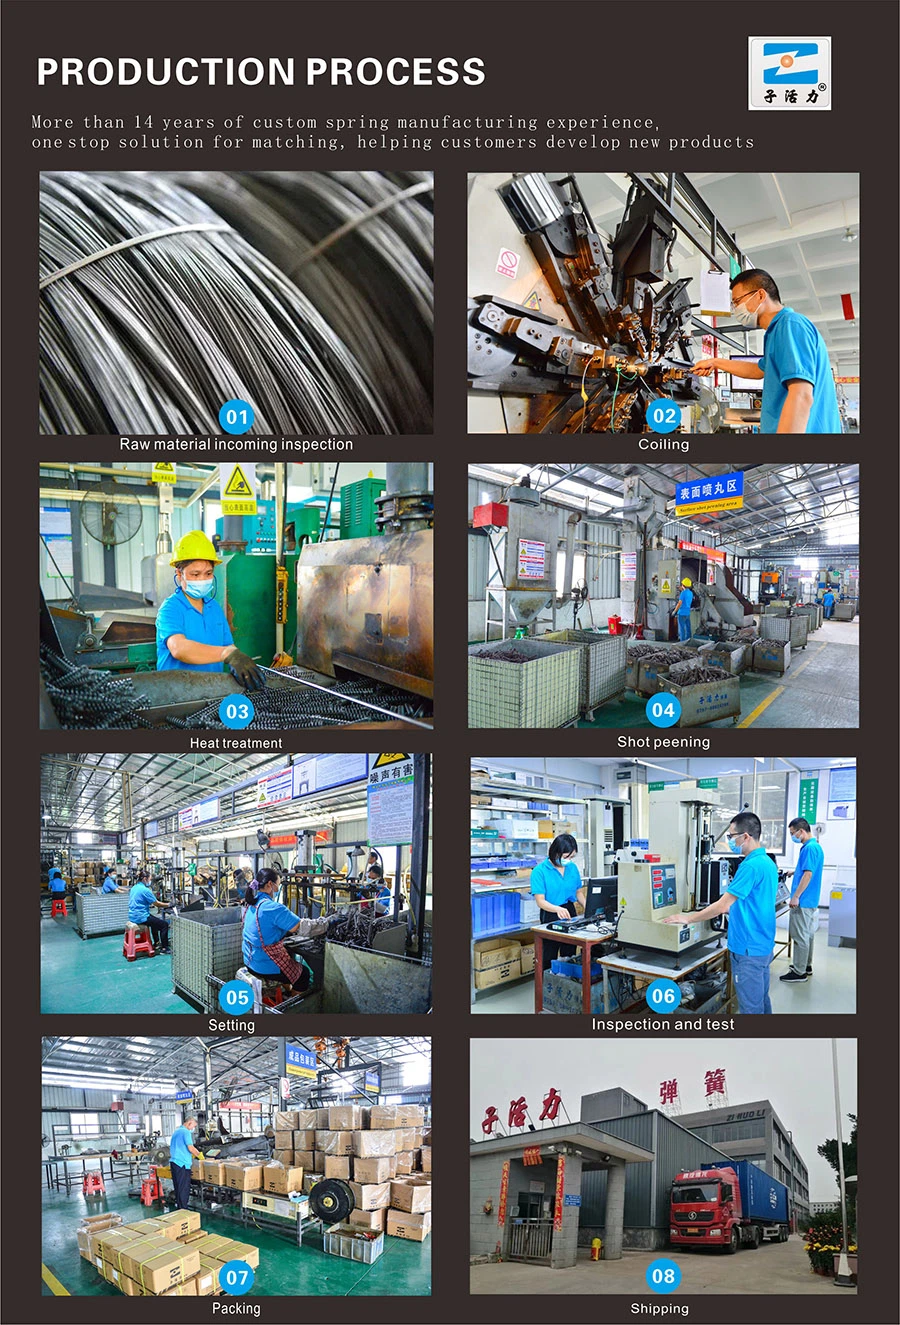 Factory Customer Conical Coil Extension Spring